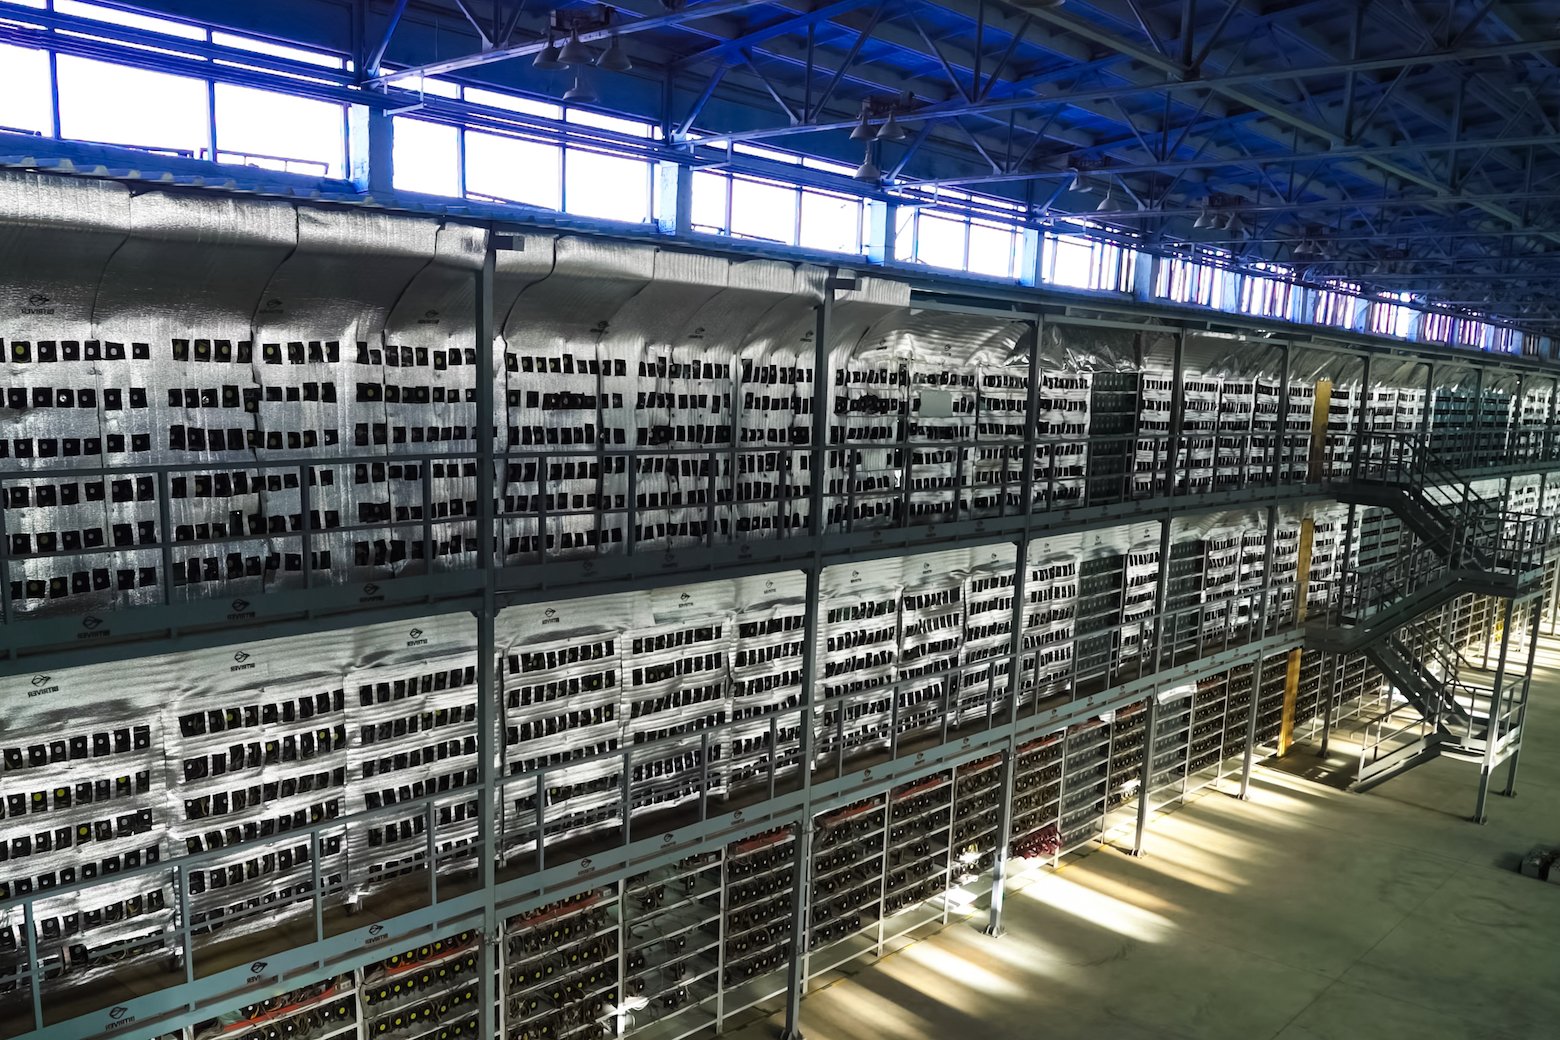 The inside of a large warehouse showing thousands of cryptocurrency miners stacked in large metal racks three levels high.